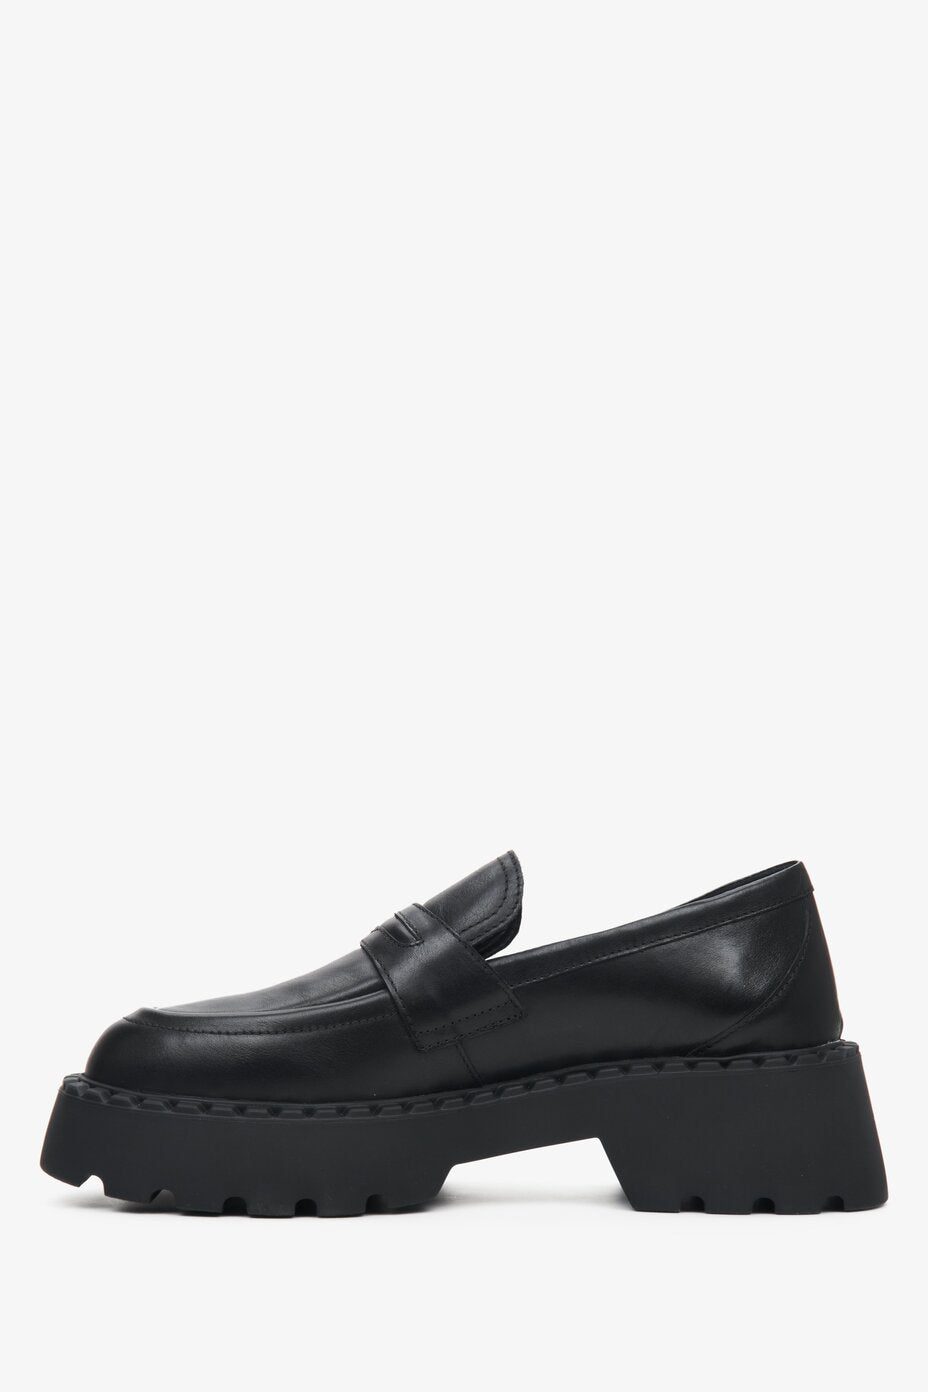 Women's black leather moccasins with a high sole by Estro